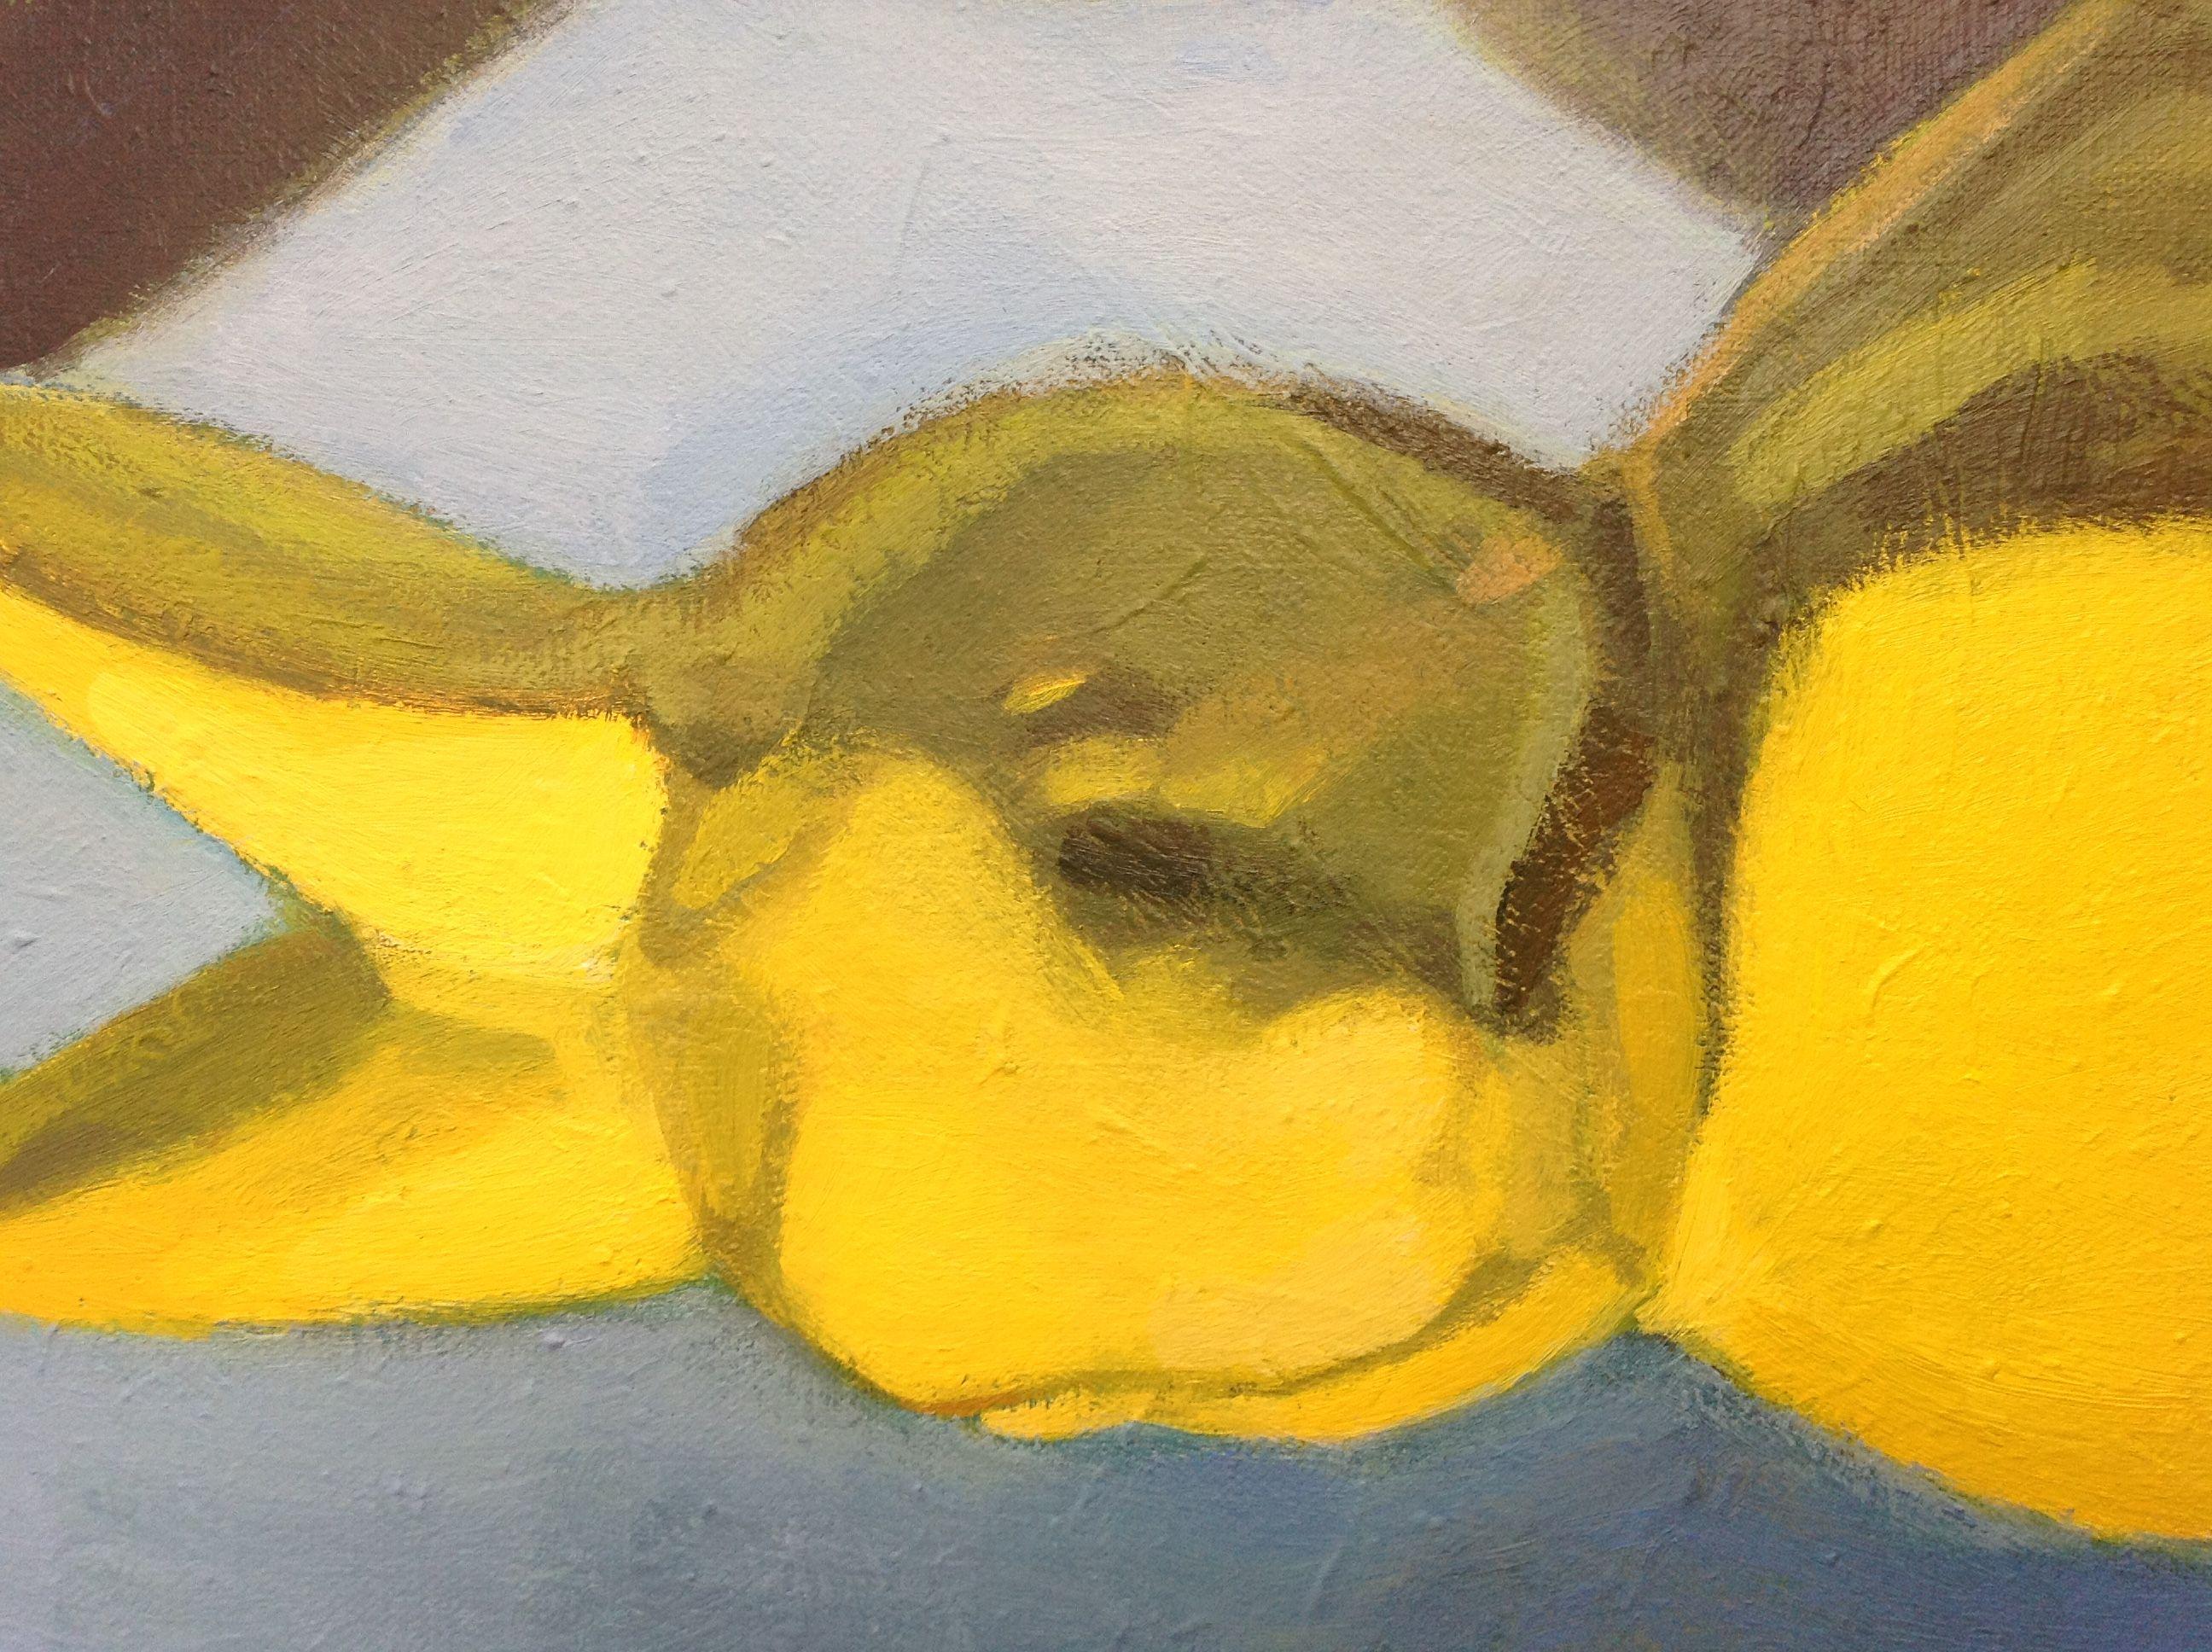 Acrylic on mounted canvas. I collect objects to use in mystill lifes. This painting belongs to a series I did with these little yellow ceramic rabbits. :: Painting :: Contemporary :: This piece comes with an official certificate of authenticity